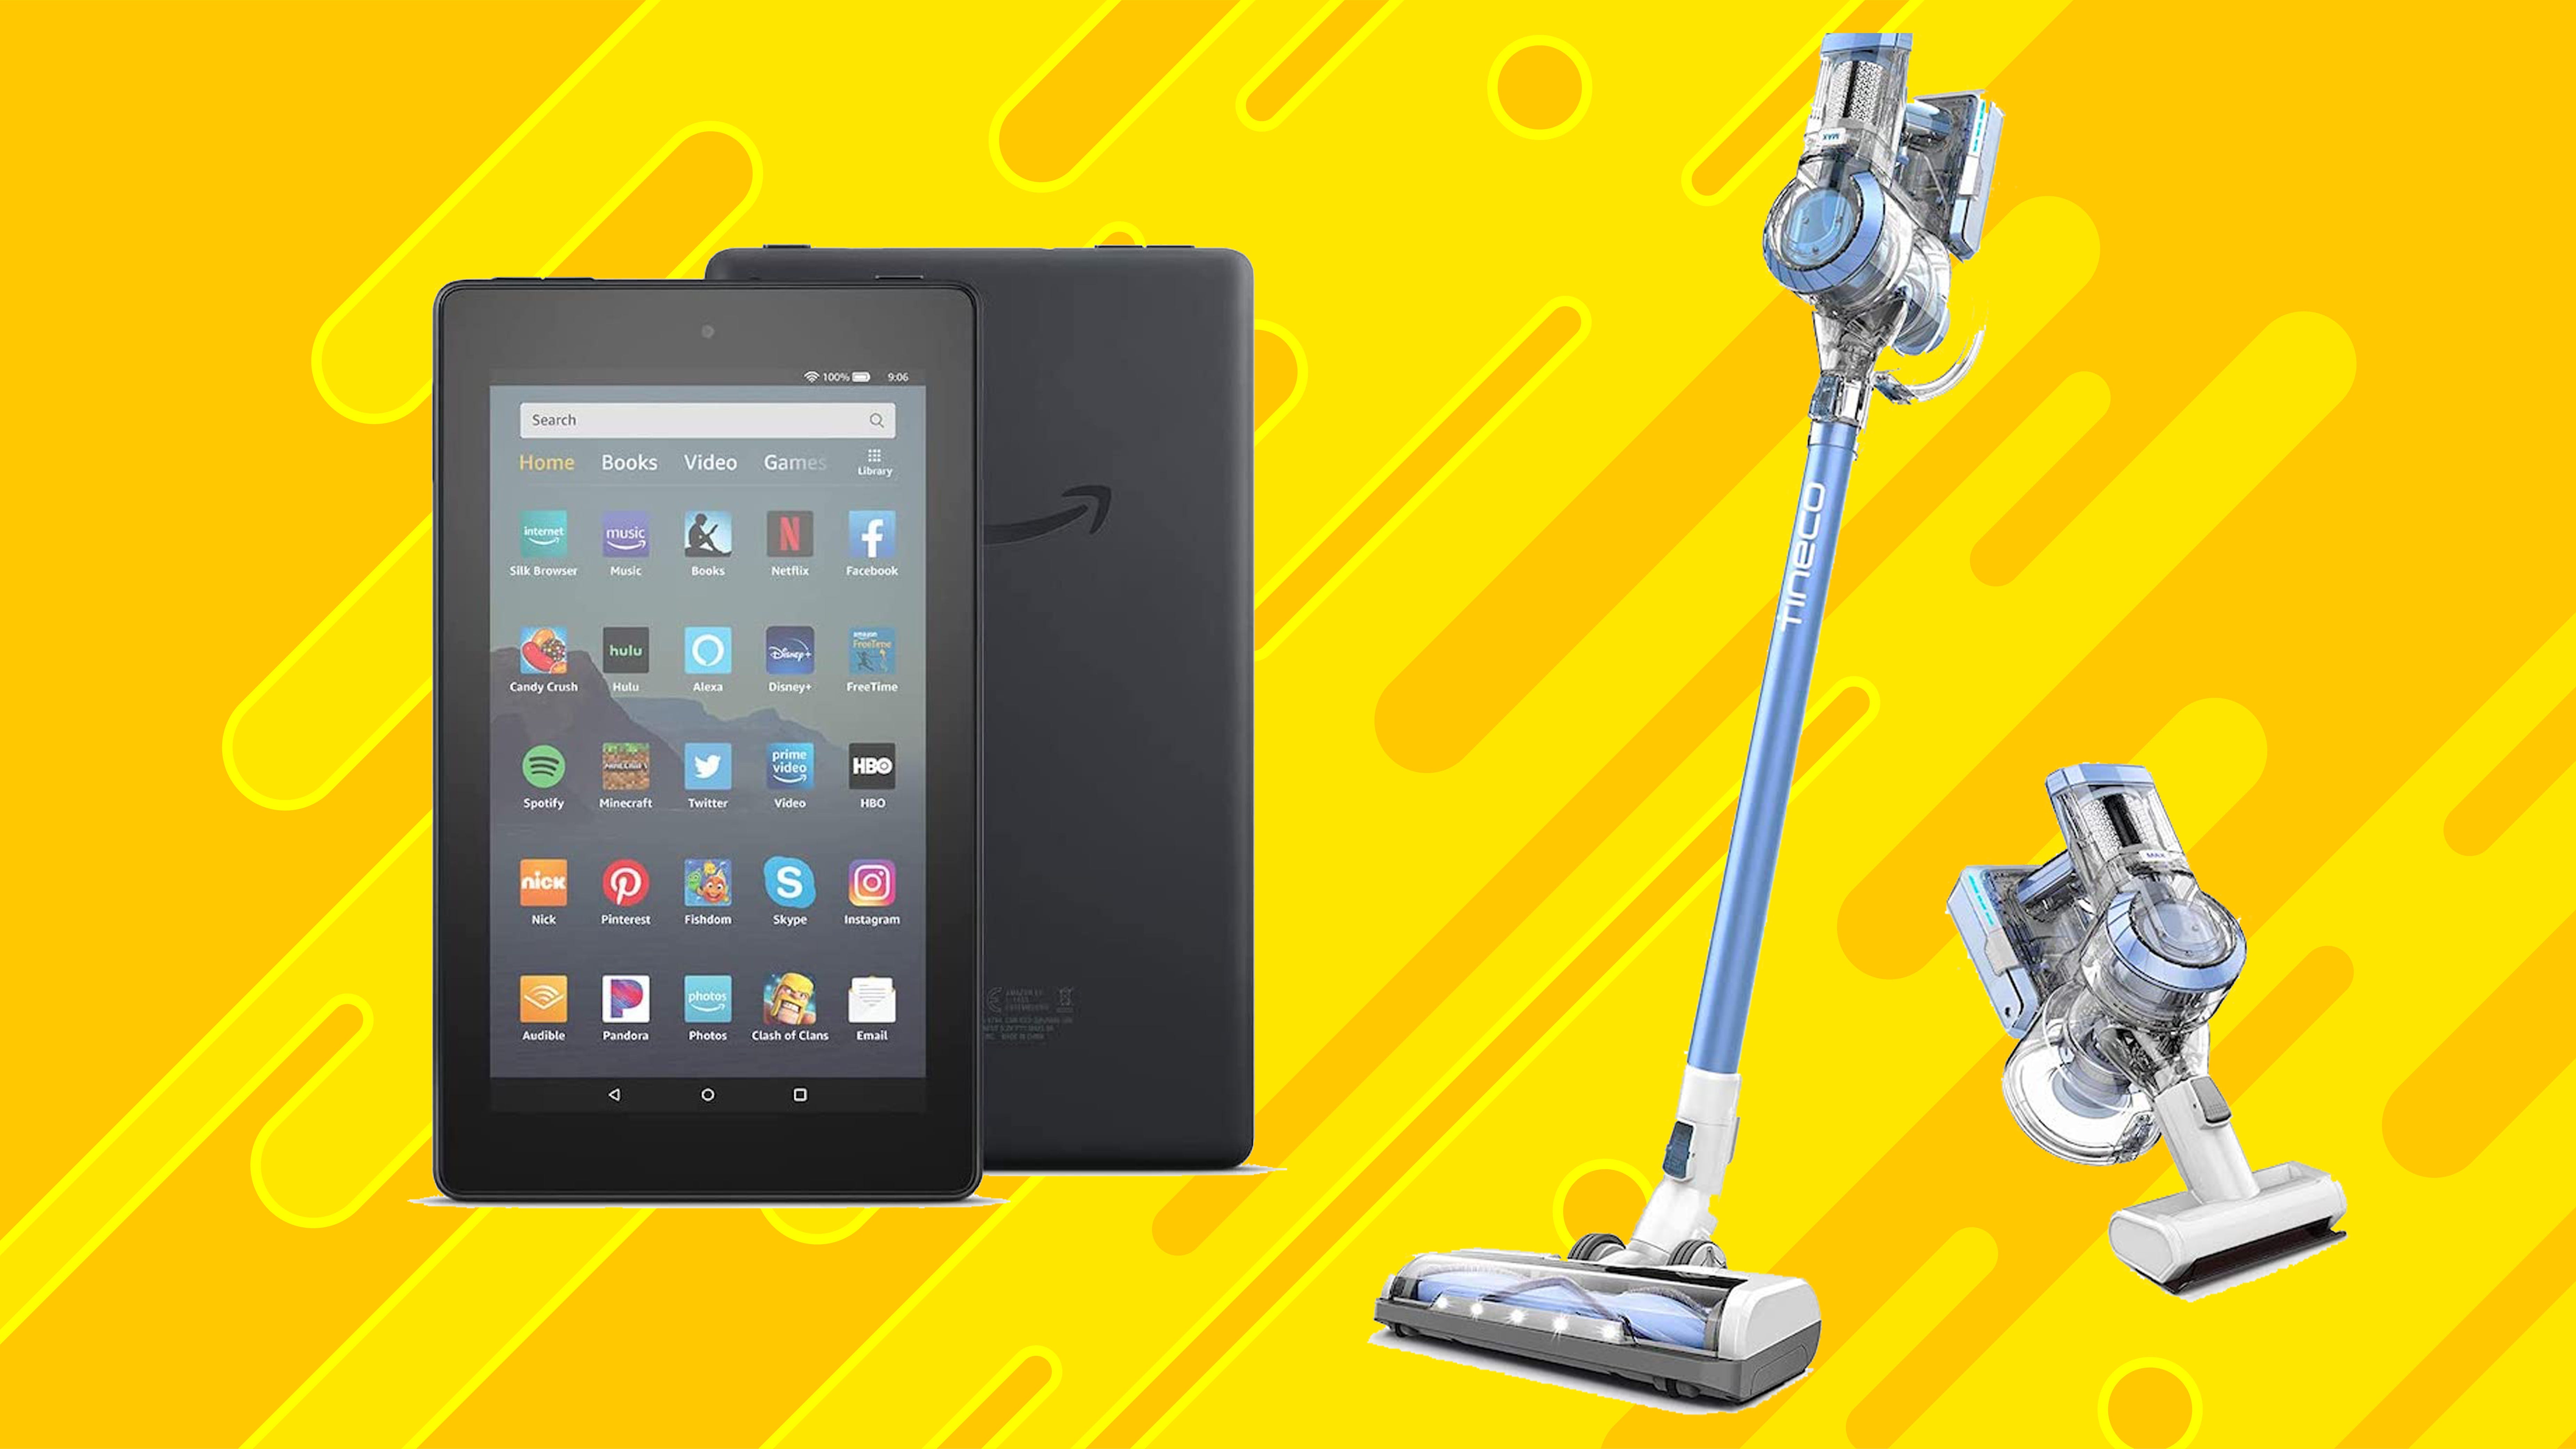 The 5 best Amazon deals you can get this Tuesday